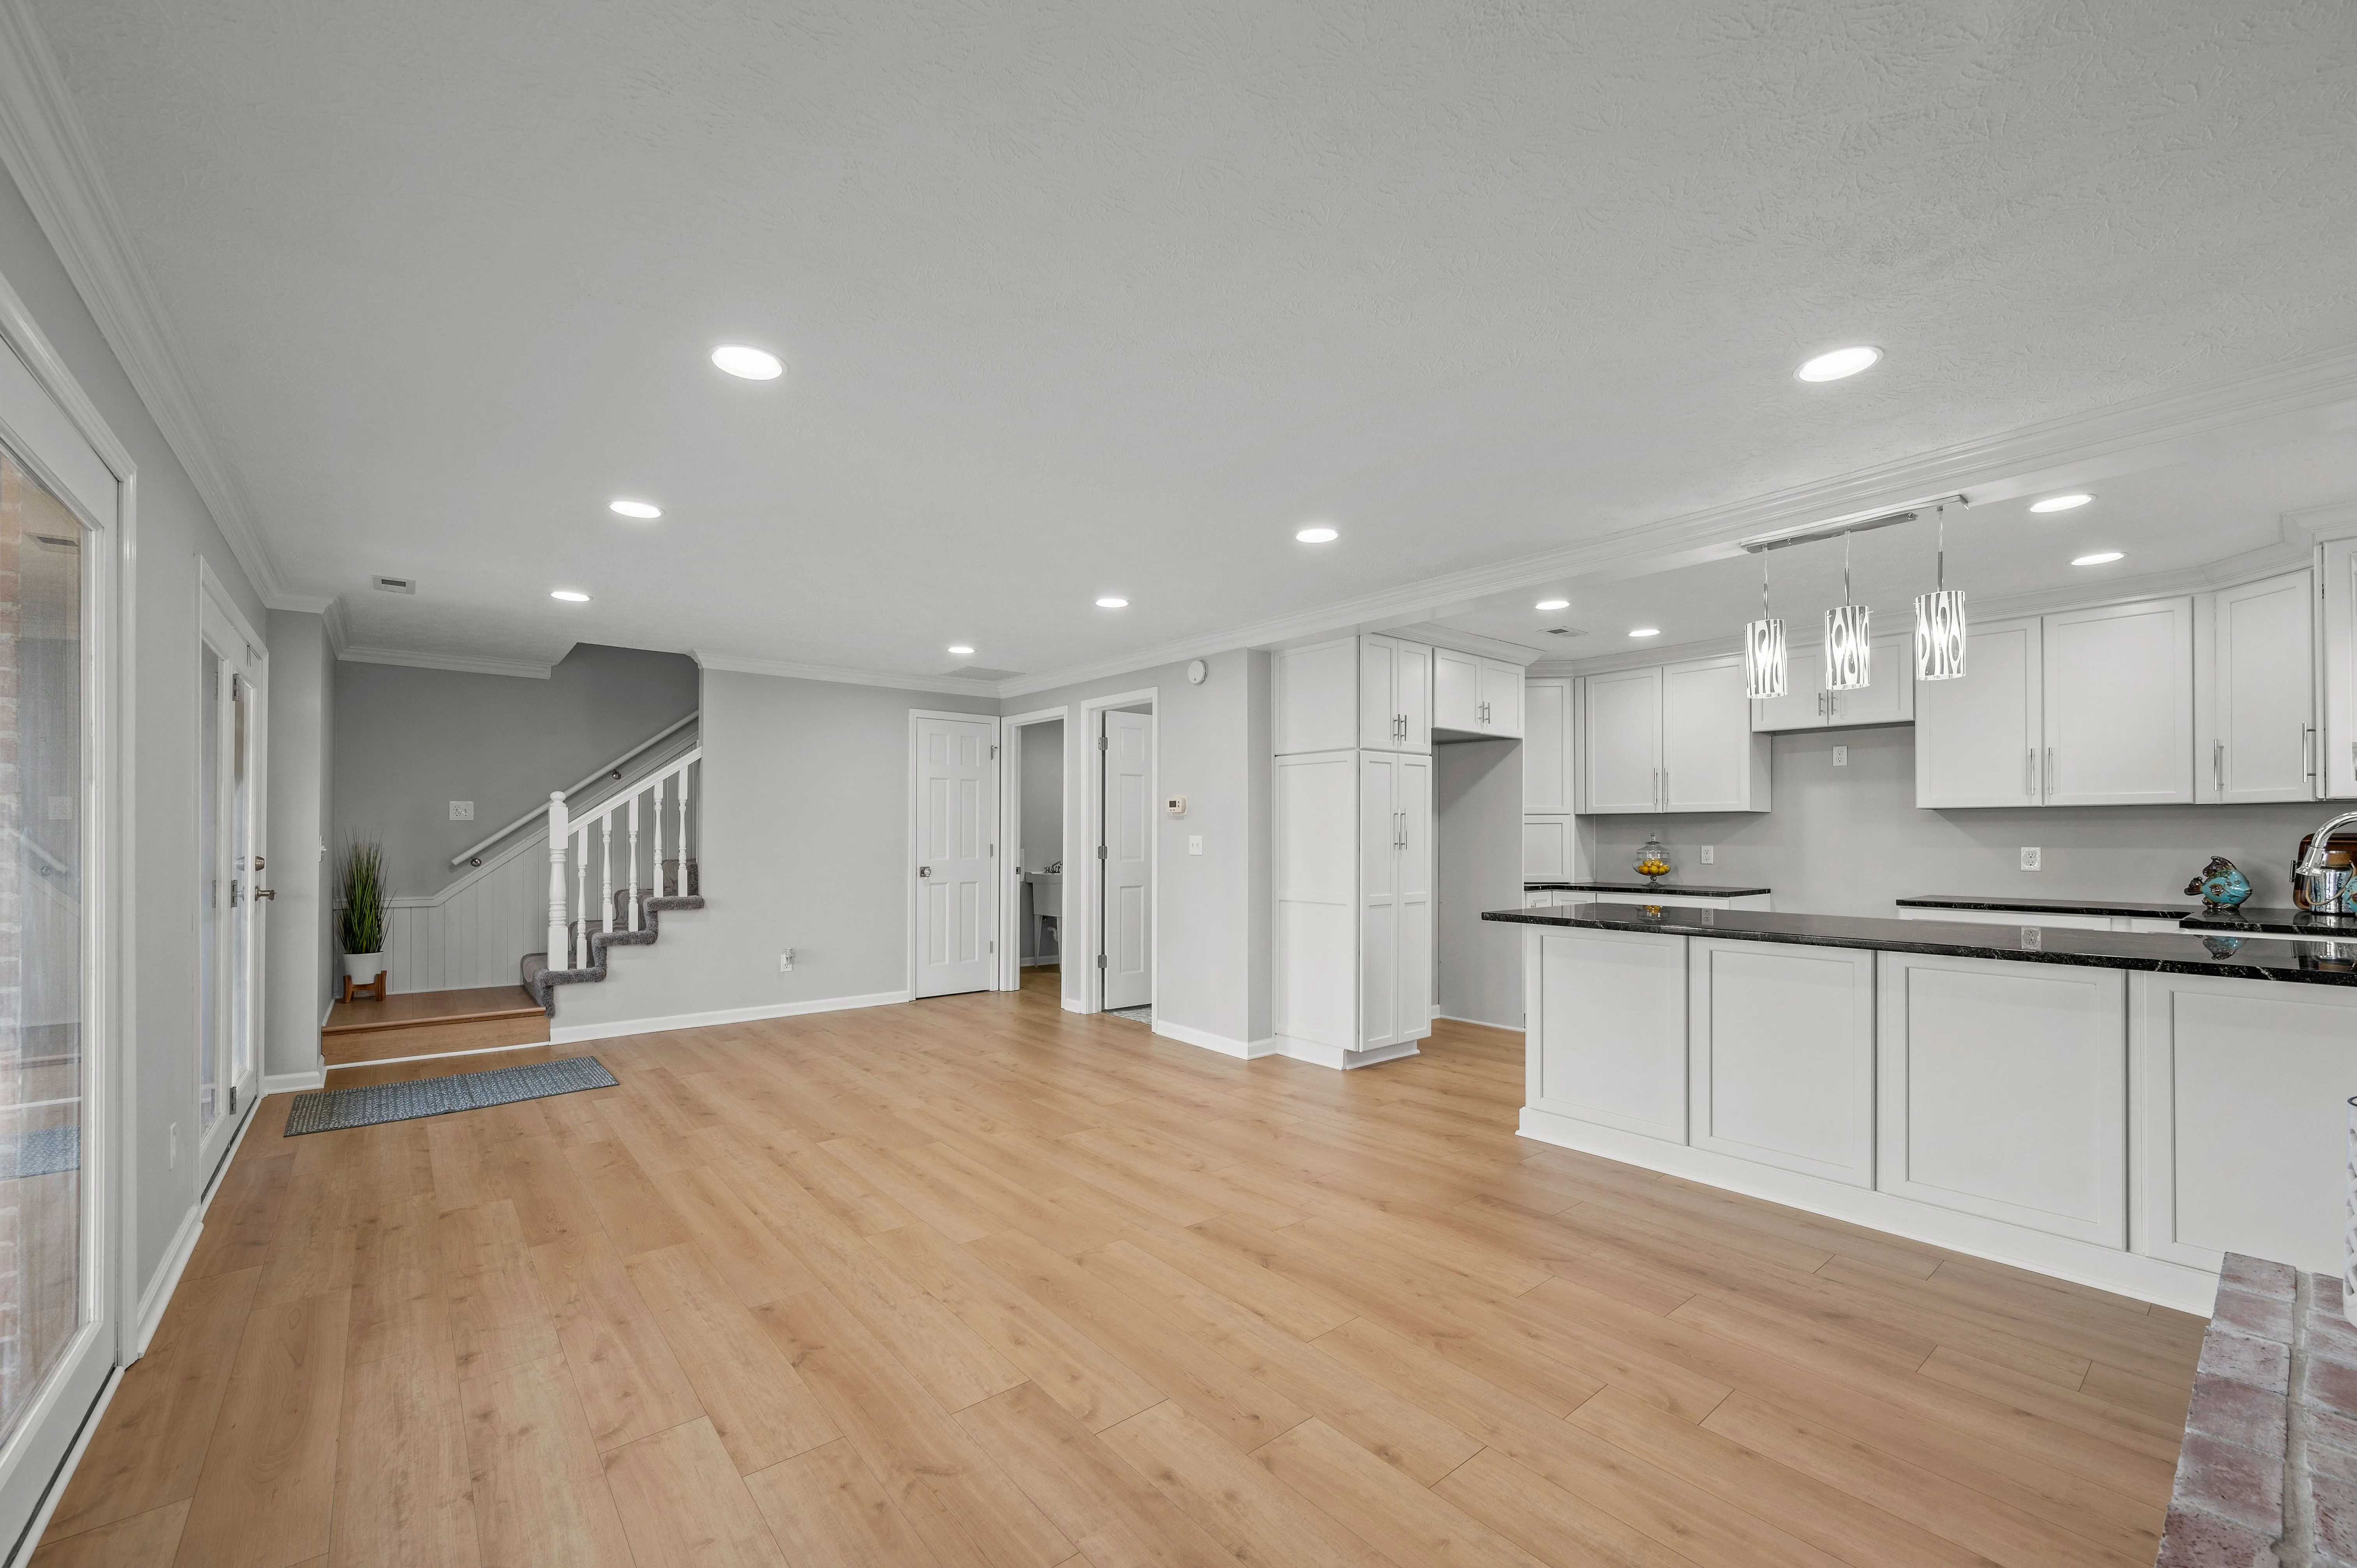 Spacious modern kitchen with white cabinets, stainless steel appliances, and hardwood floors leading to a living area with recessed lighting and a staircase on the left.